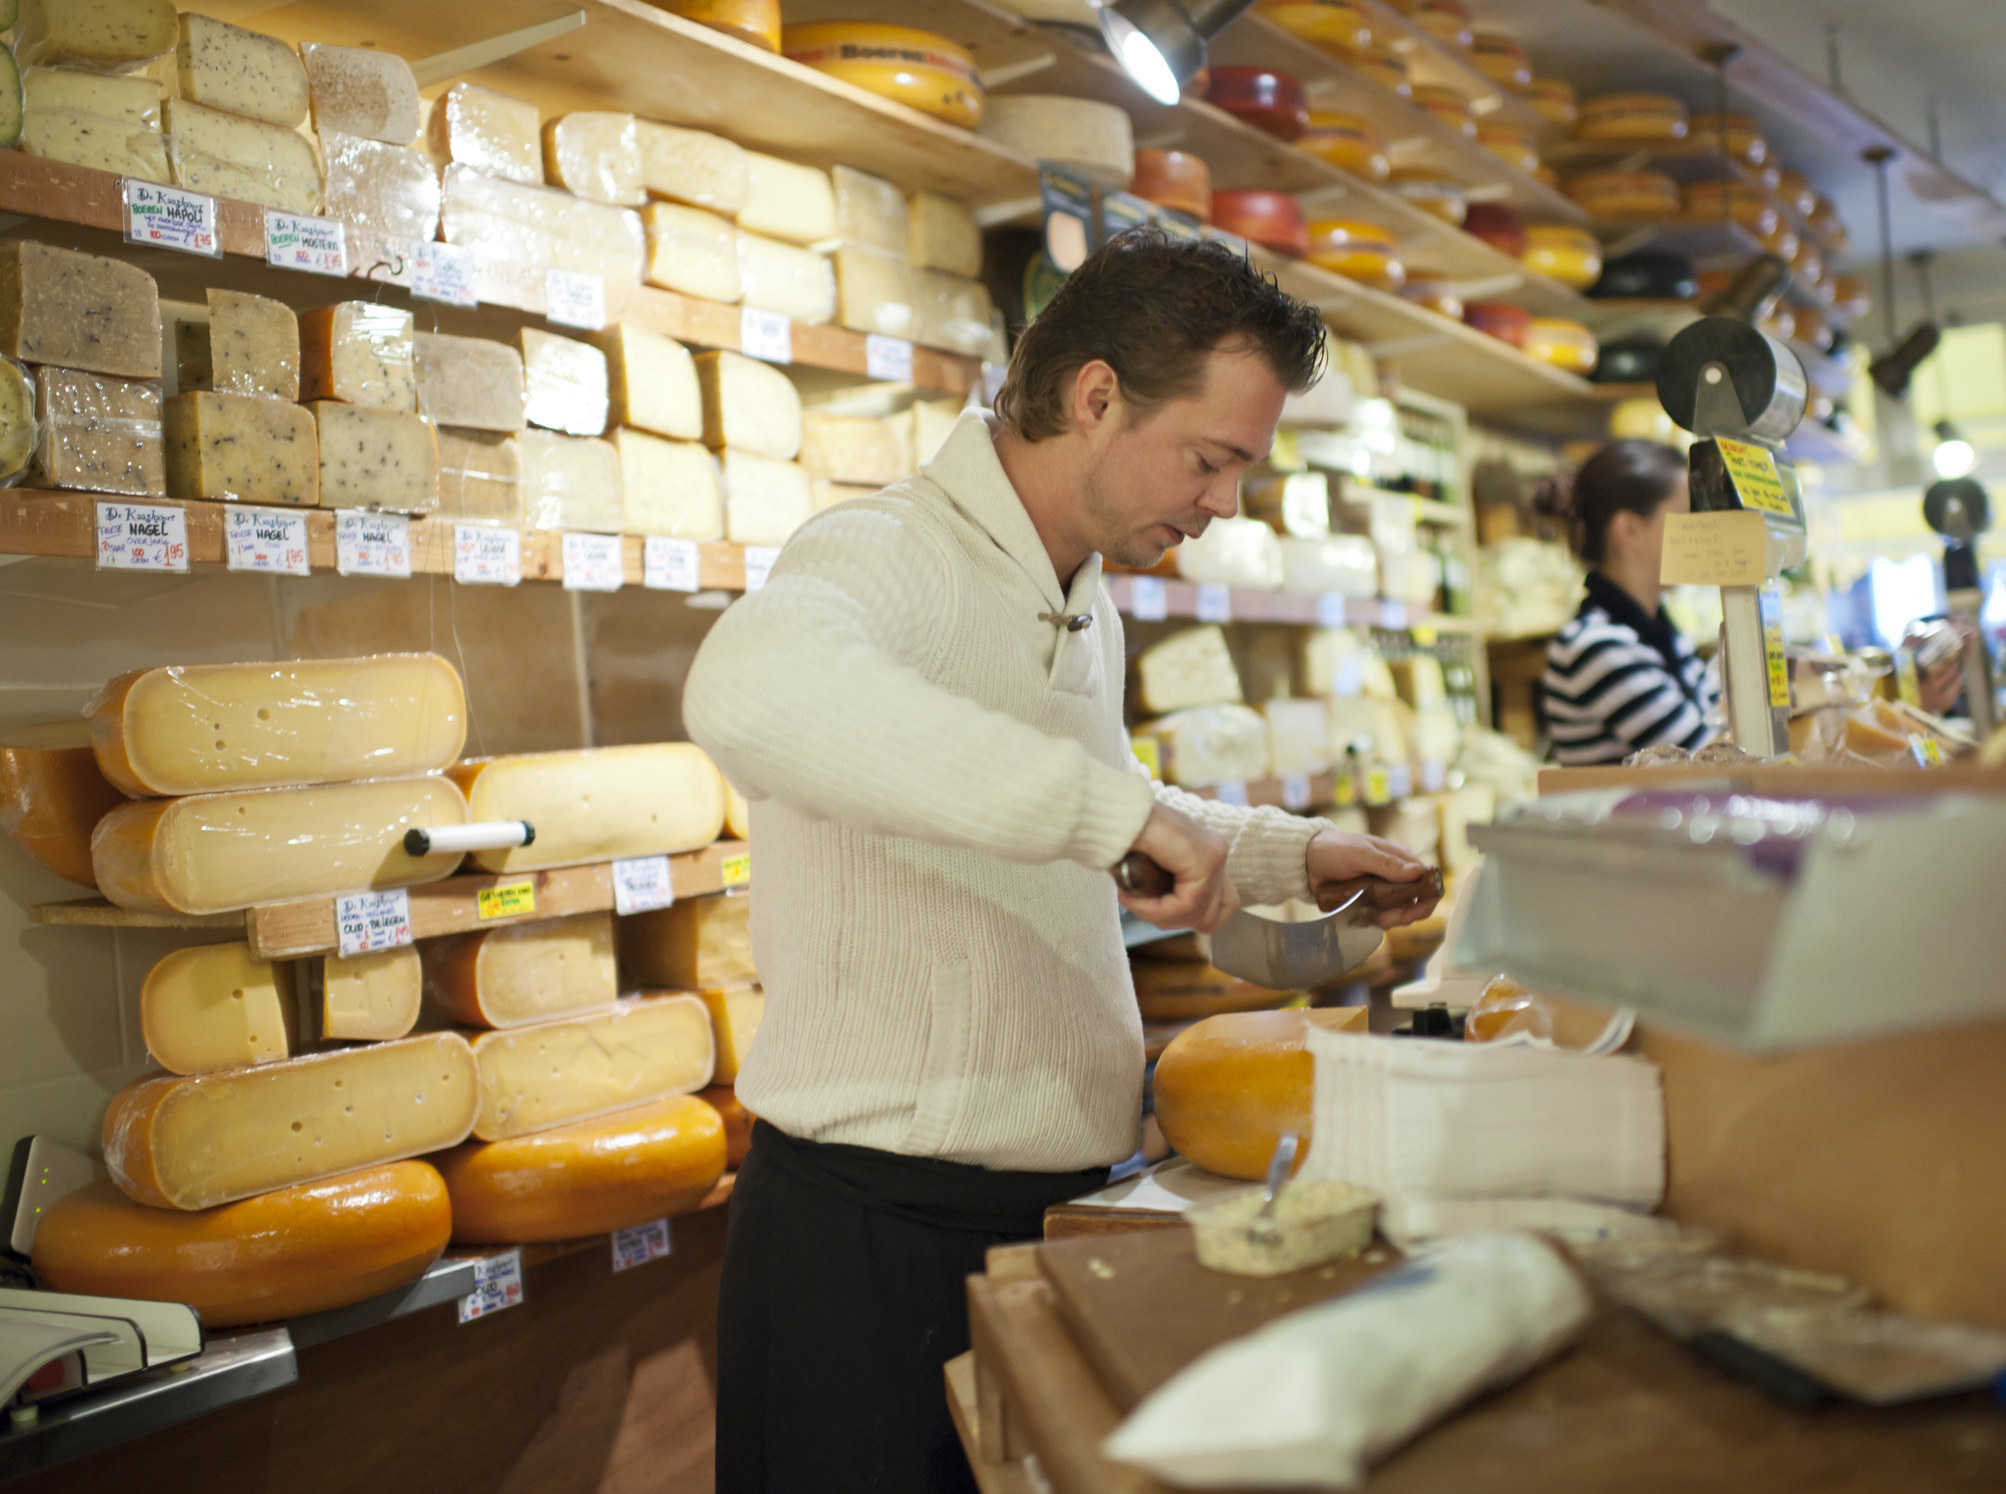 a man cutting a big block of cheese with countless rolls of cheese stacked behind him on shop shelves